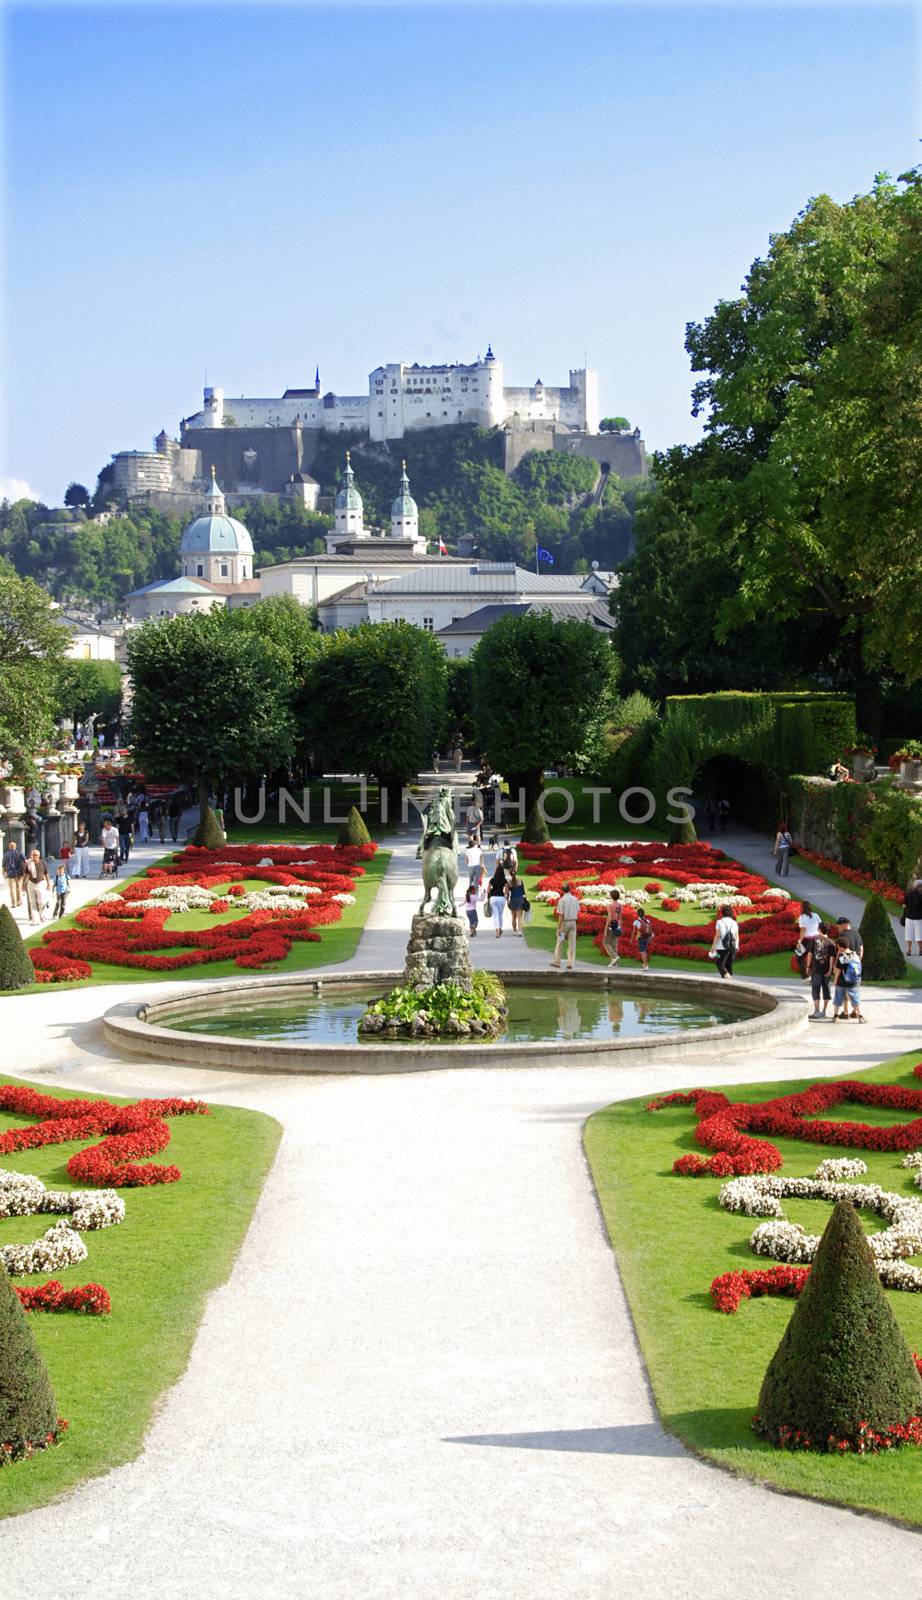 View at Austrian citySalzburg castle from the gardens 